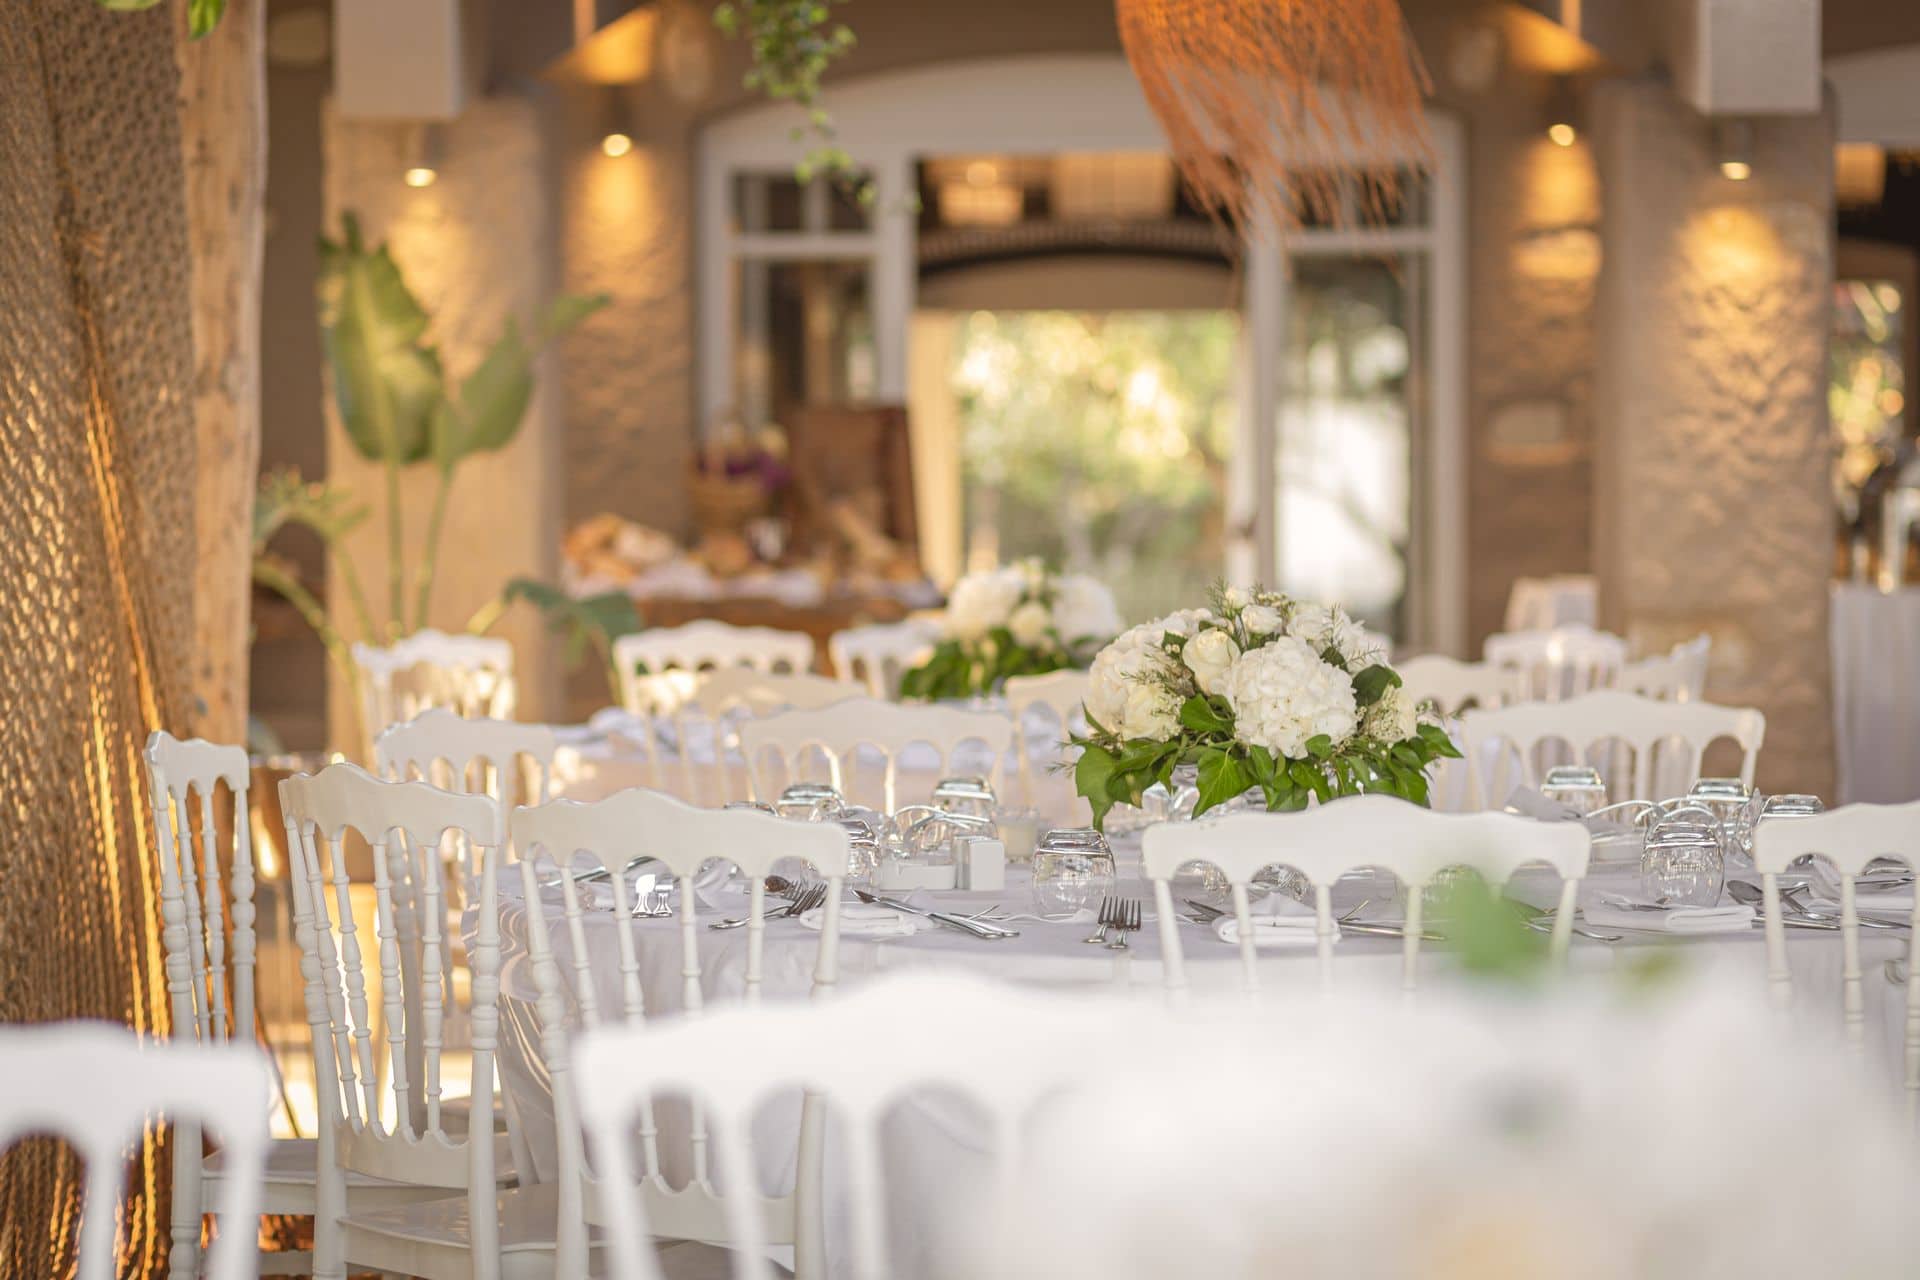 An elegant setting for weddings and other social events at our luxury hotels in Samos